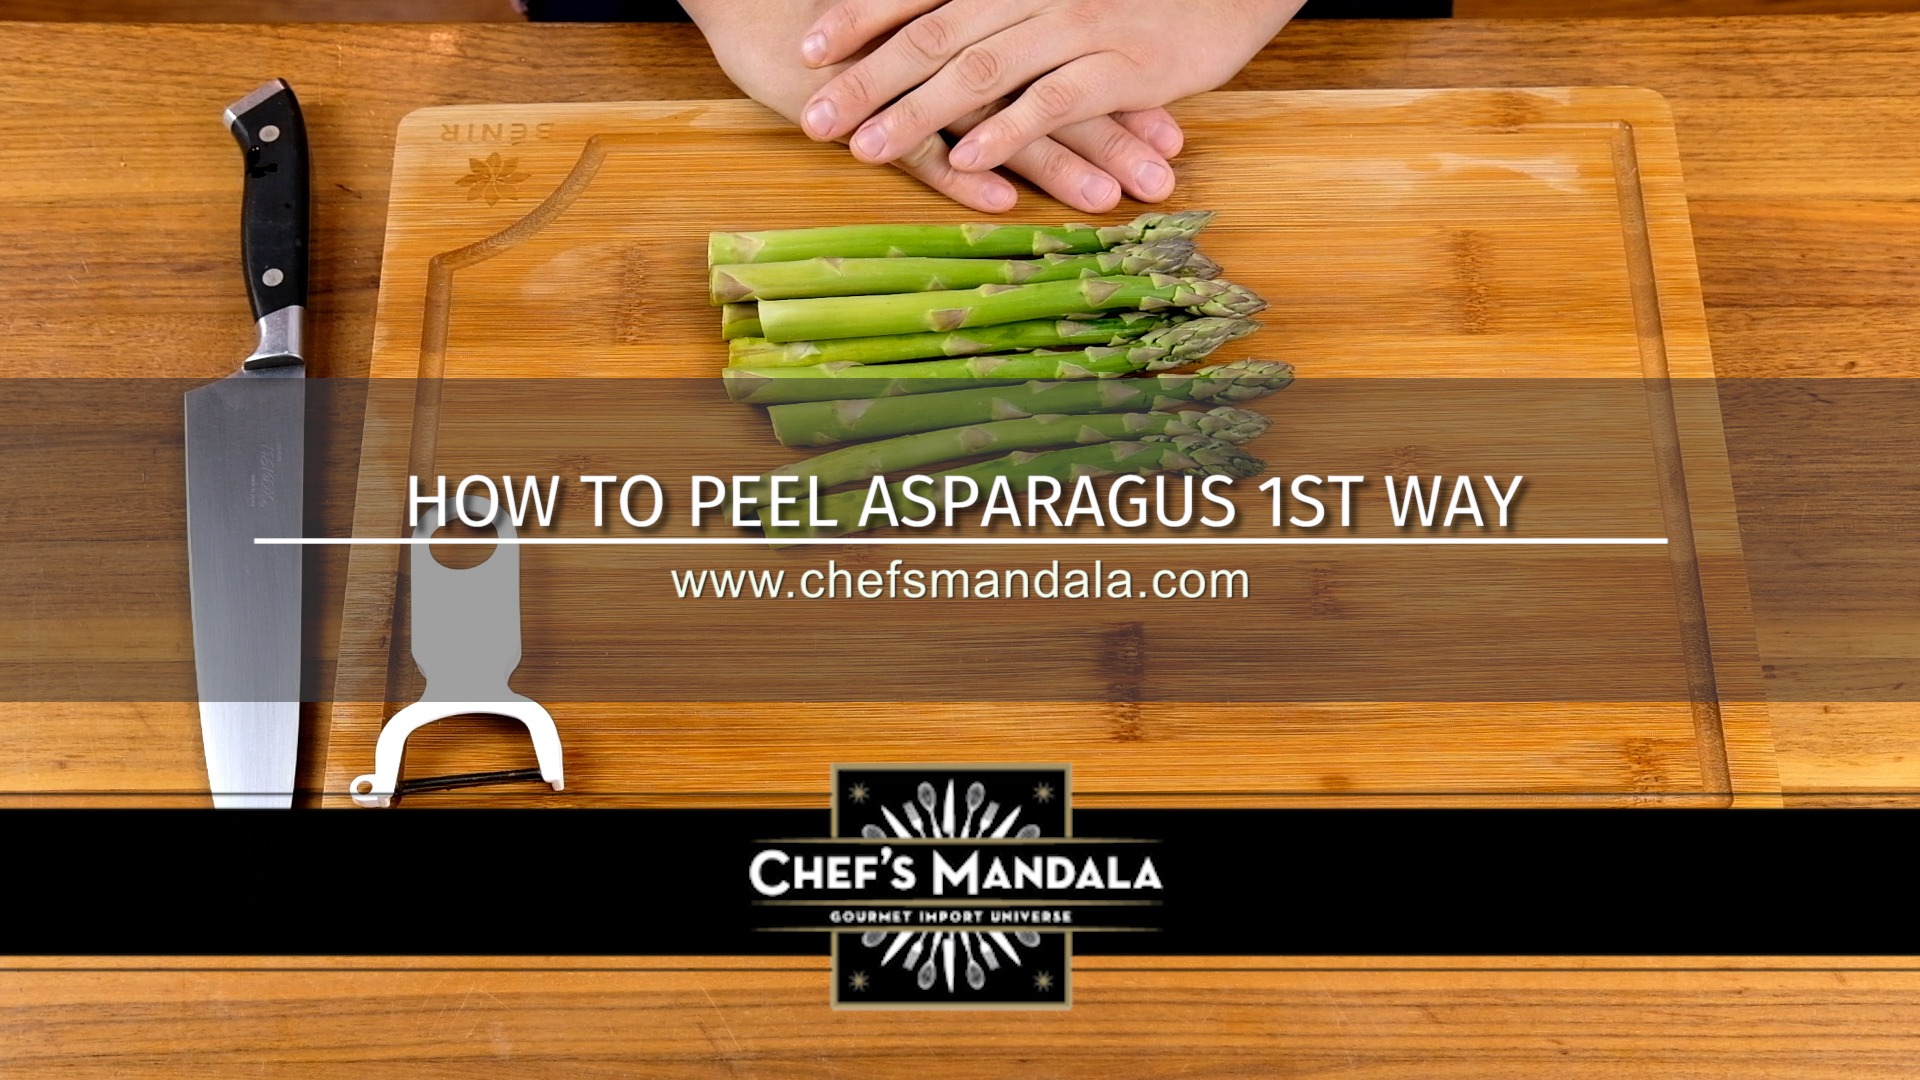 HOW TO PEEL ASPARAGUS 1ST WAY